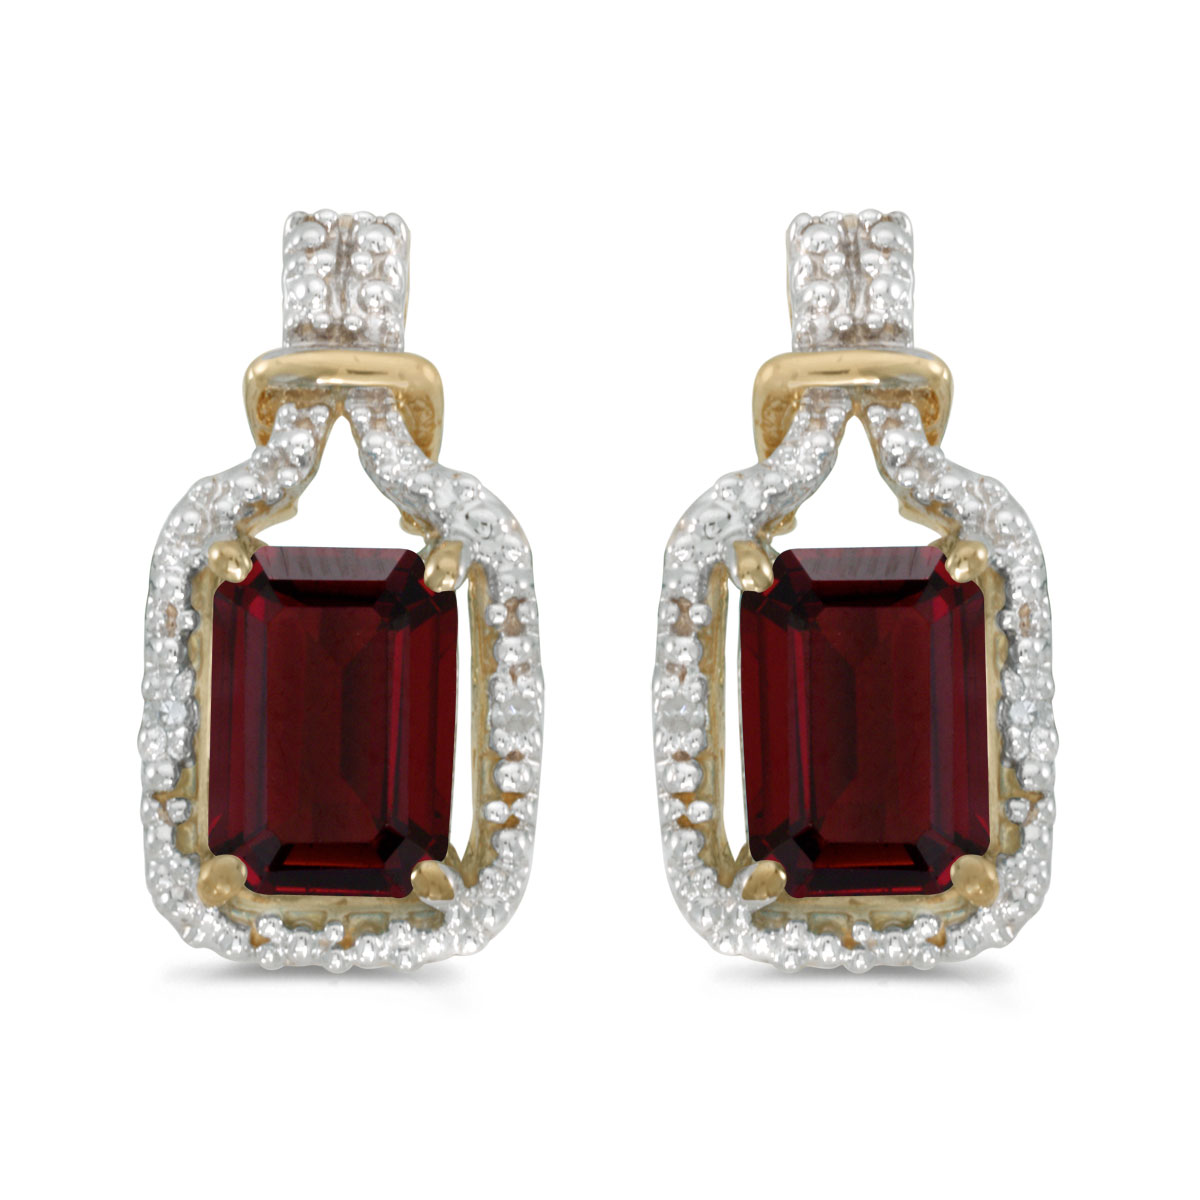 JCX2038: These 14k yellow gold emerald-cut garnet and diamond earrings feature 7x5 mm genuine natural garnets with a 1.92 ct total weight and sparkling diamond accents.